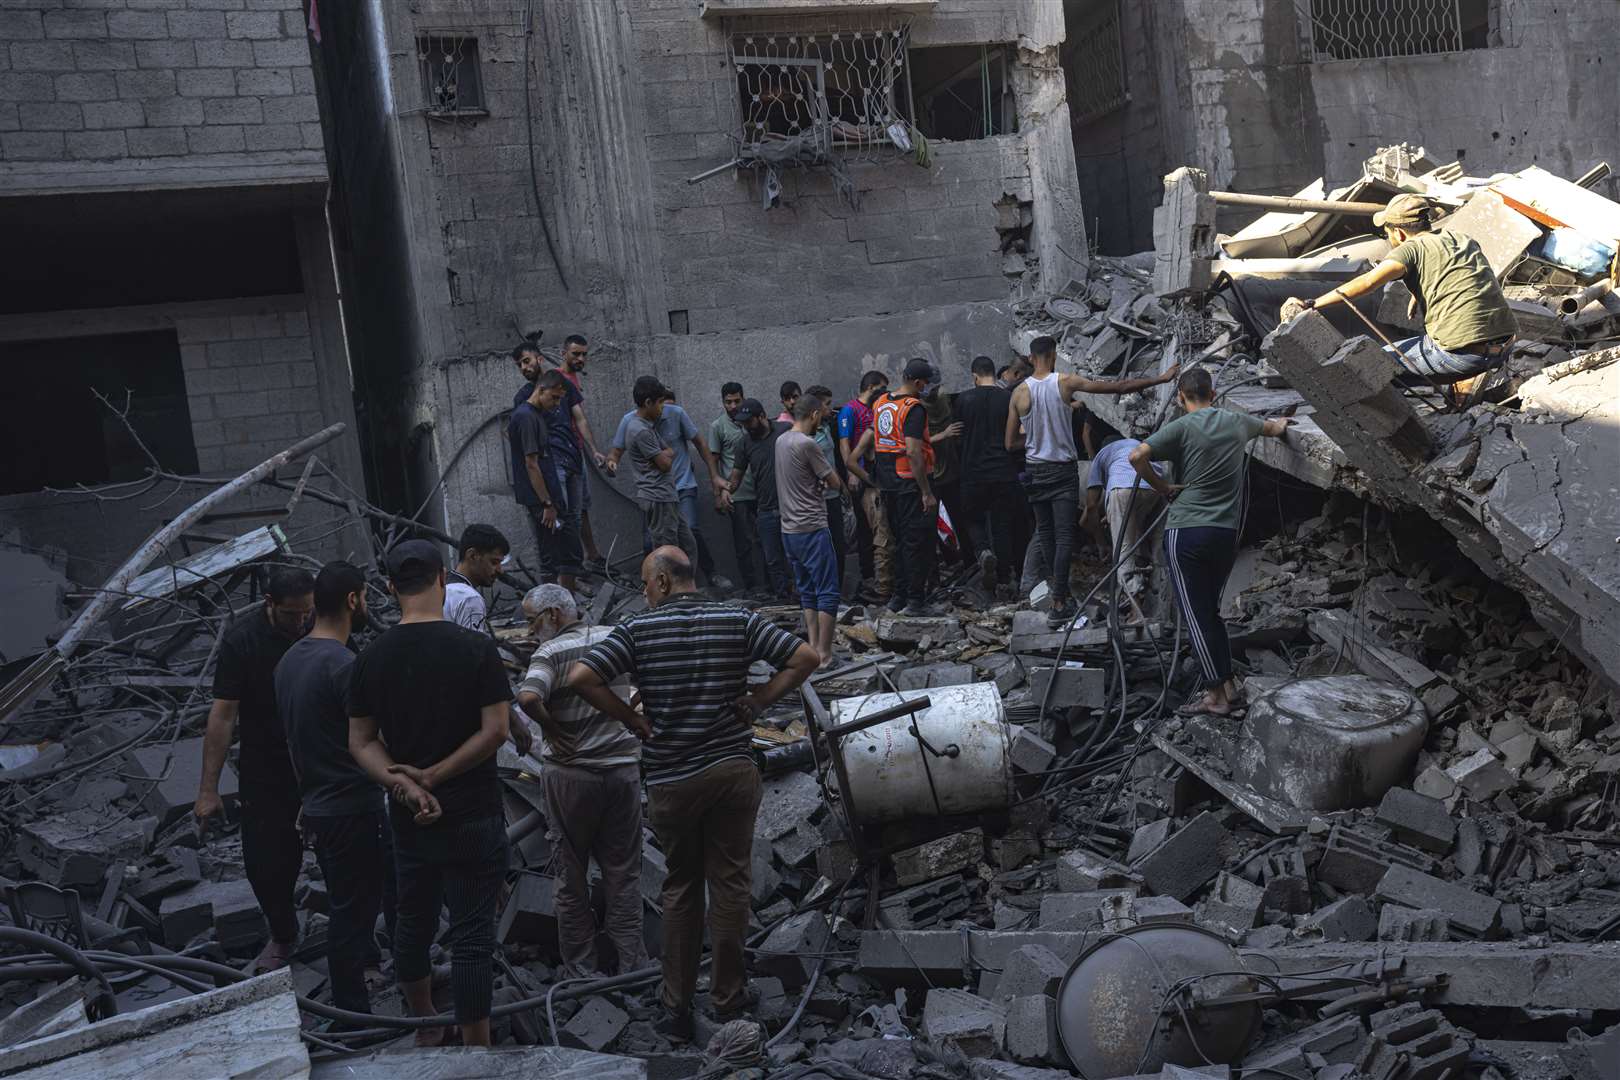 Palestinians search for bodies and survivors in the rubble of a residential building levelled in an Israeli airstrike at Al Shati Refugee Camp (Fatima Shbair/AP)